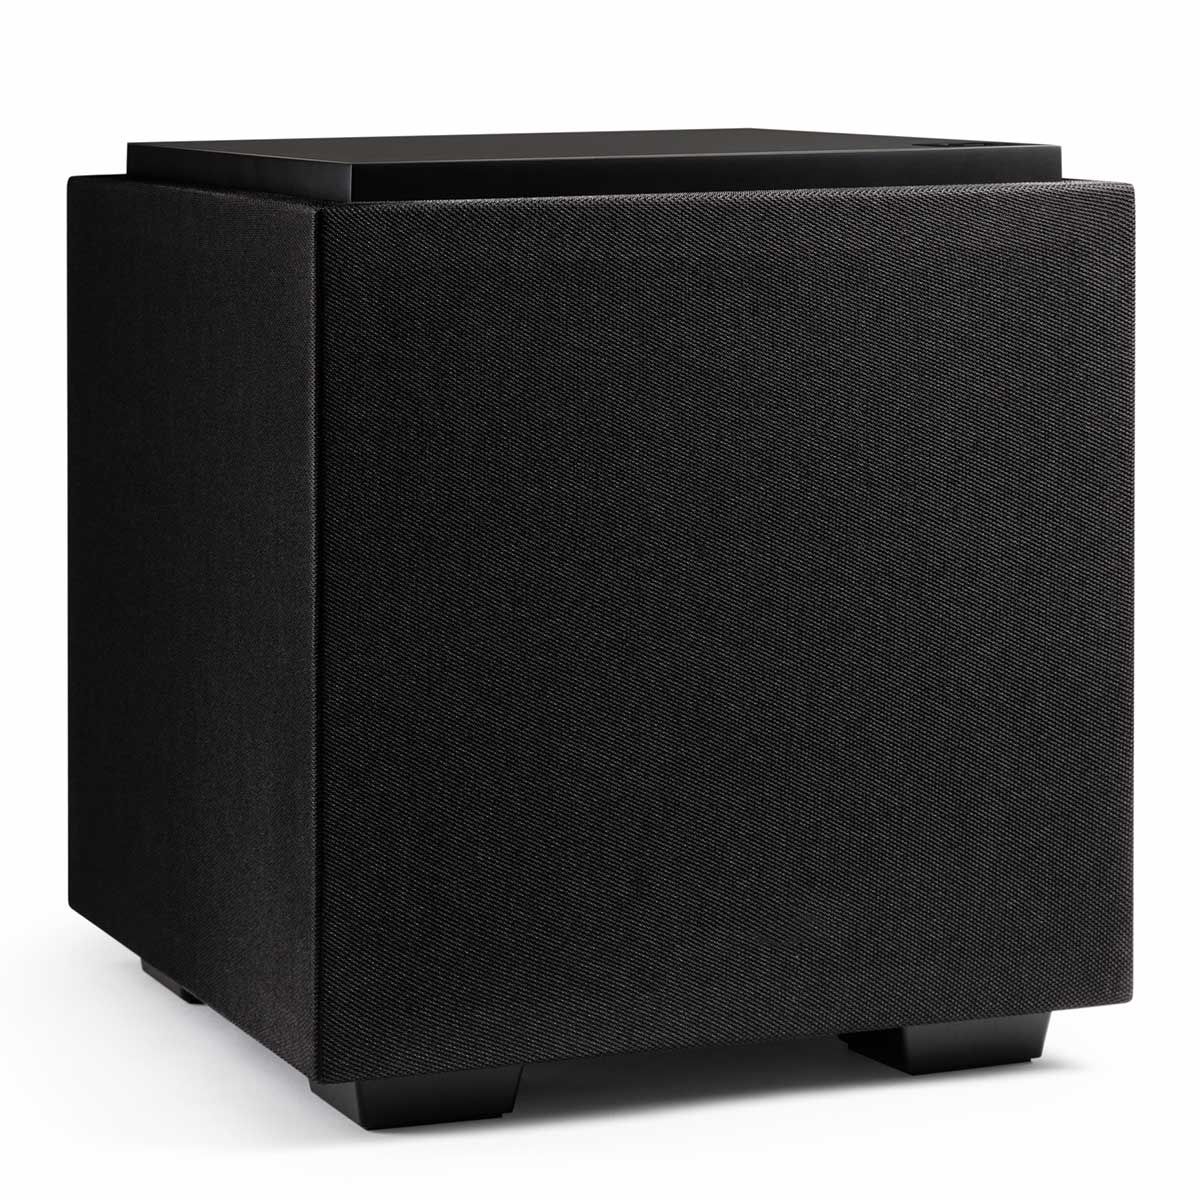 Definitive Technology Descend 8" Subwoofer, Midnight Black, front right angle